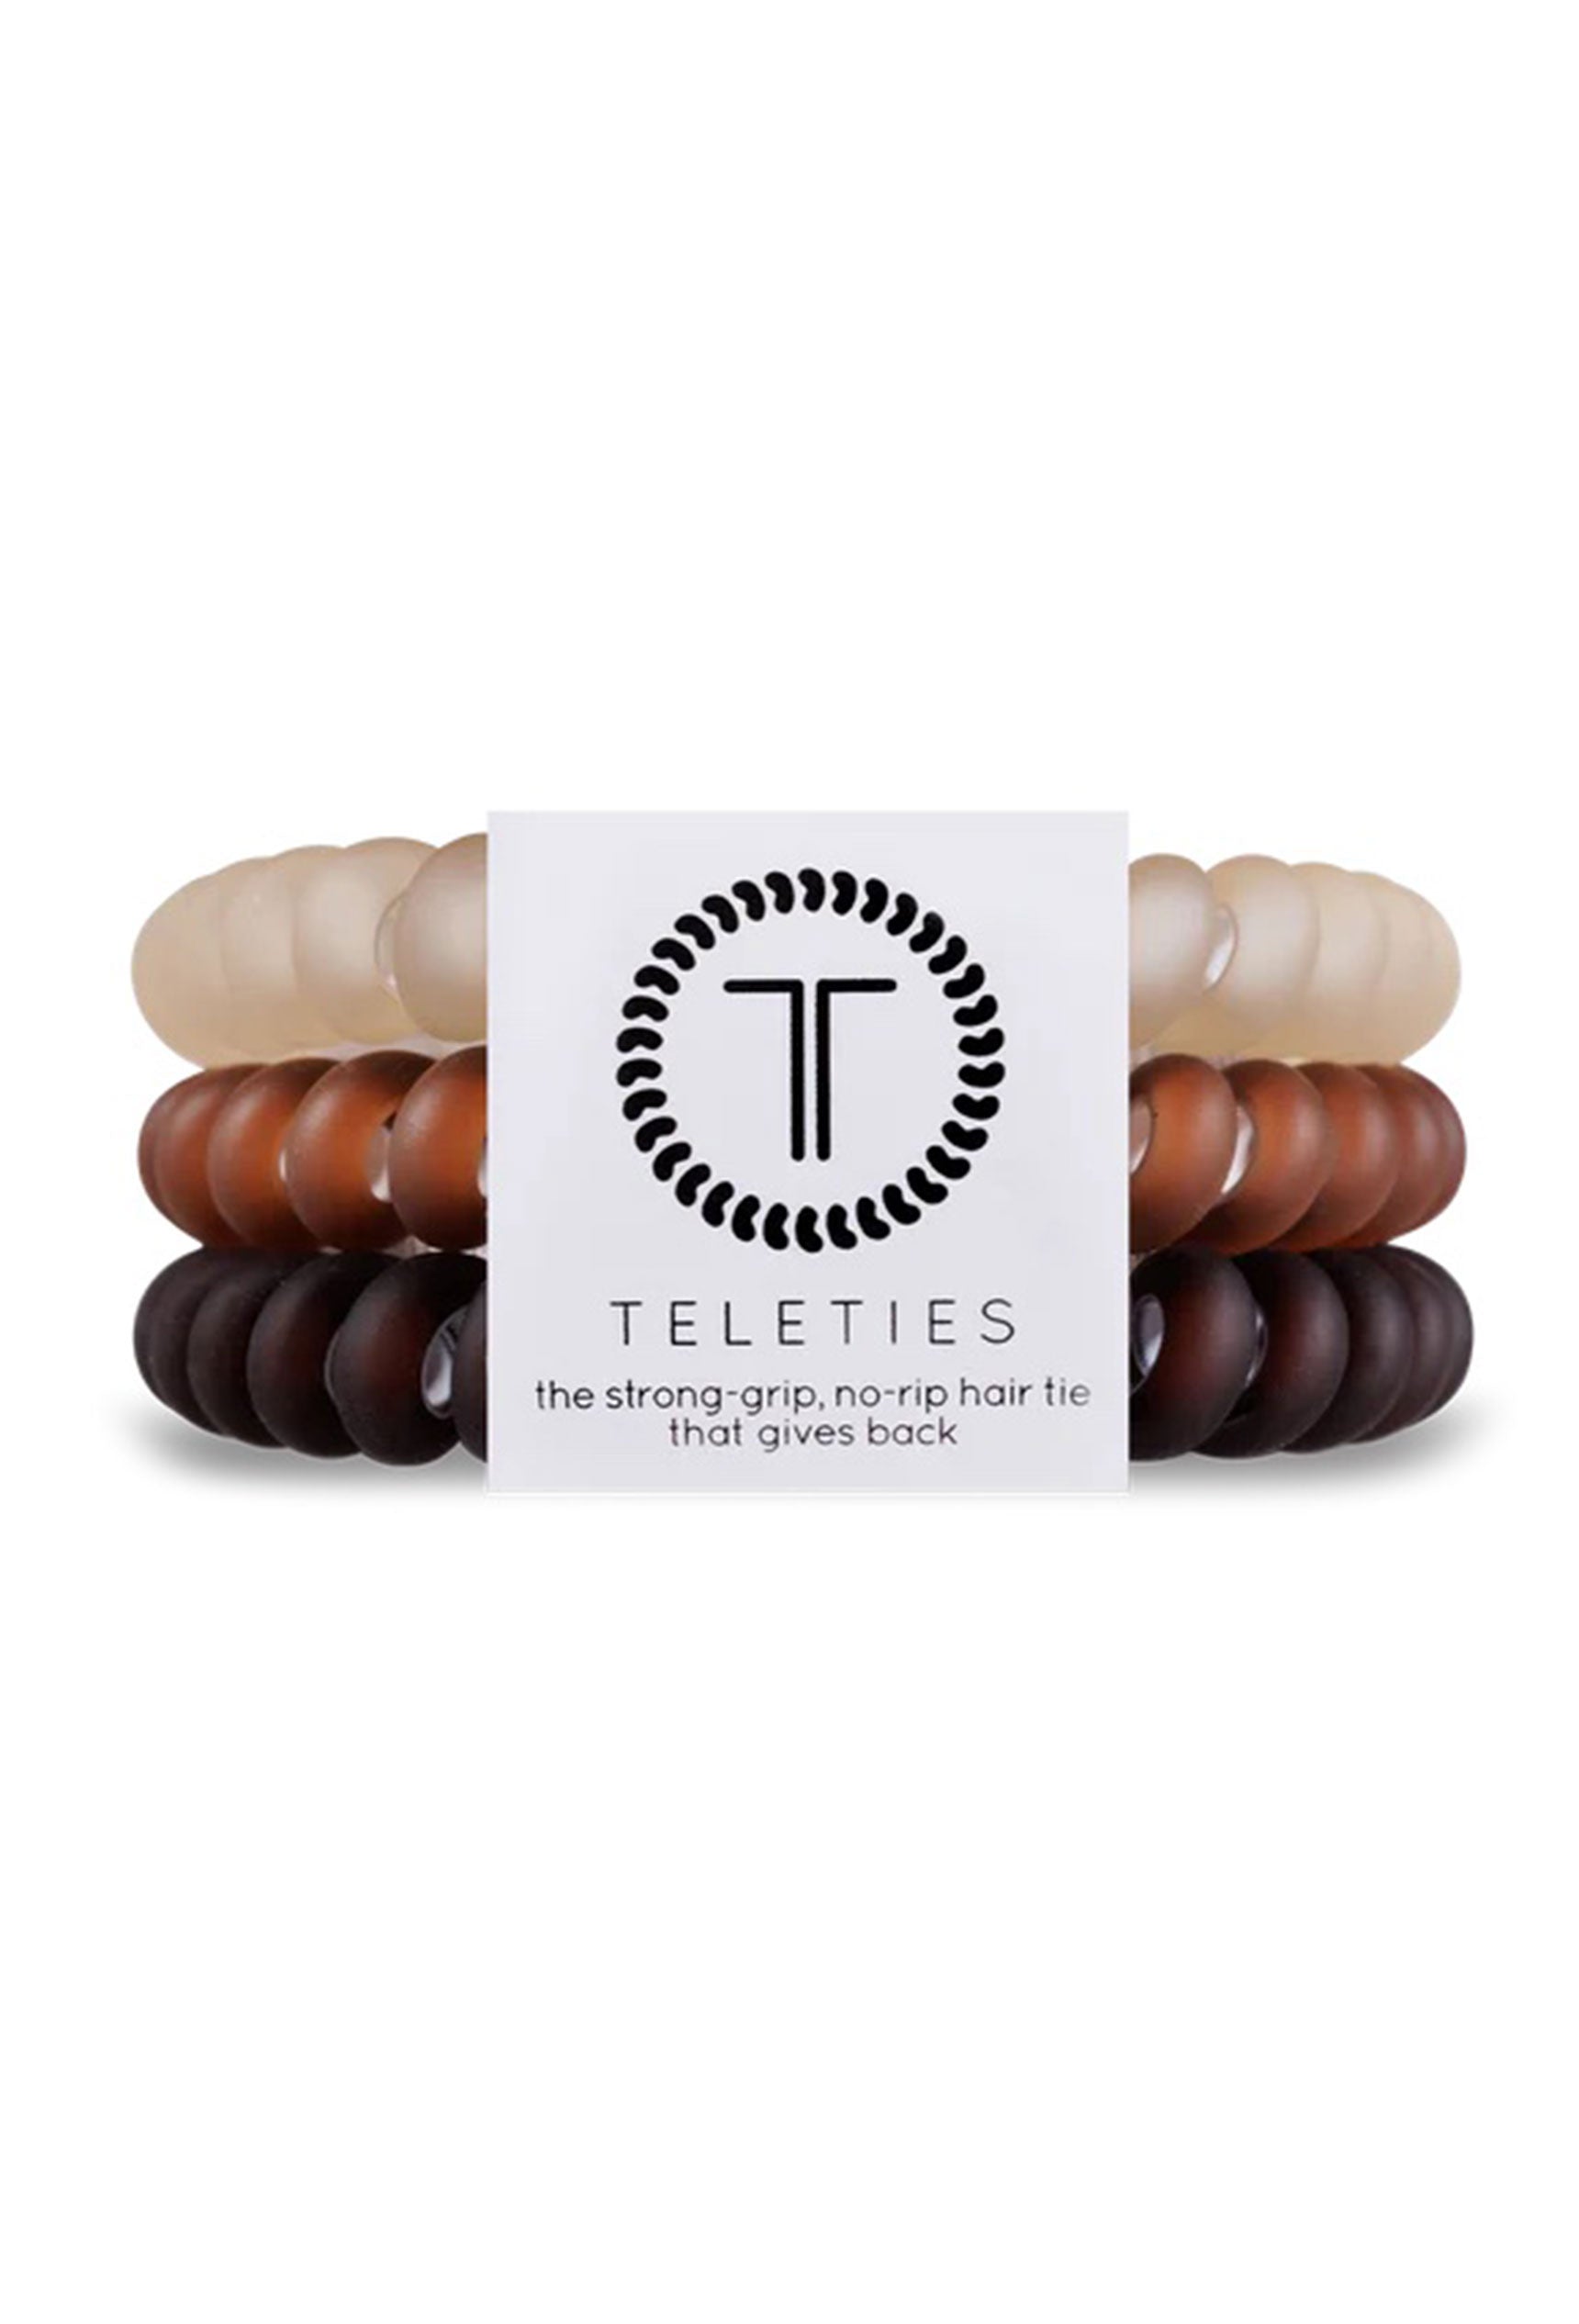 TELETIES Small Hair Ties - For The Love of Mattes, set of 3, coil style hair ties, ombre from brown to cream